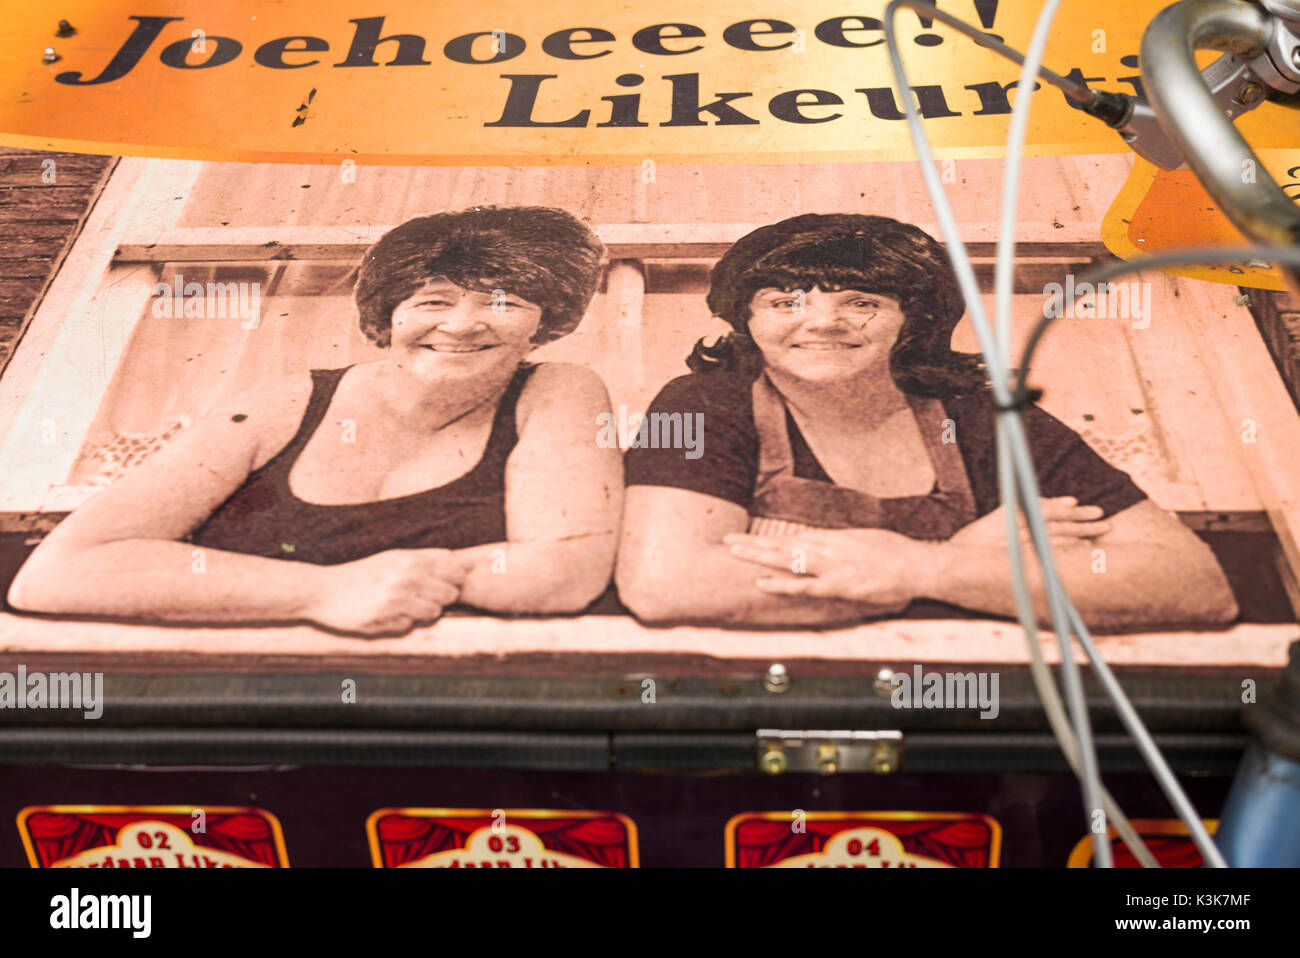 Netherlands, Amsterdam, Nine Streets area, delivery bicycle with image of two barmaids Stock Photo